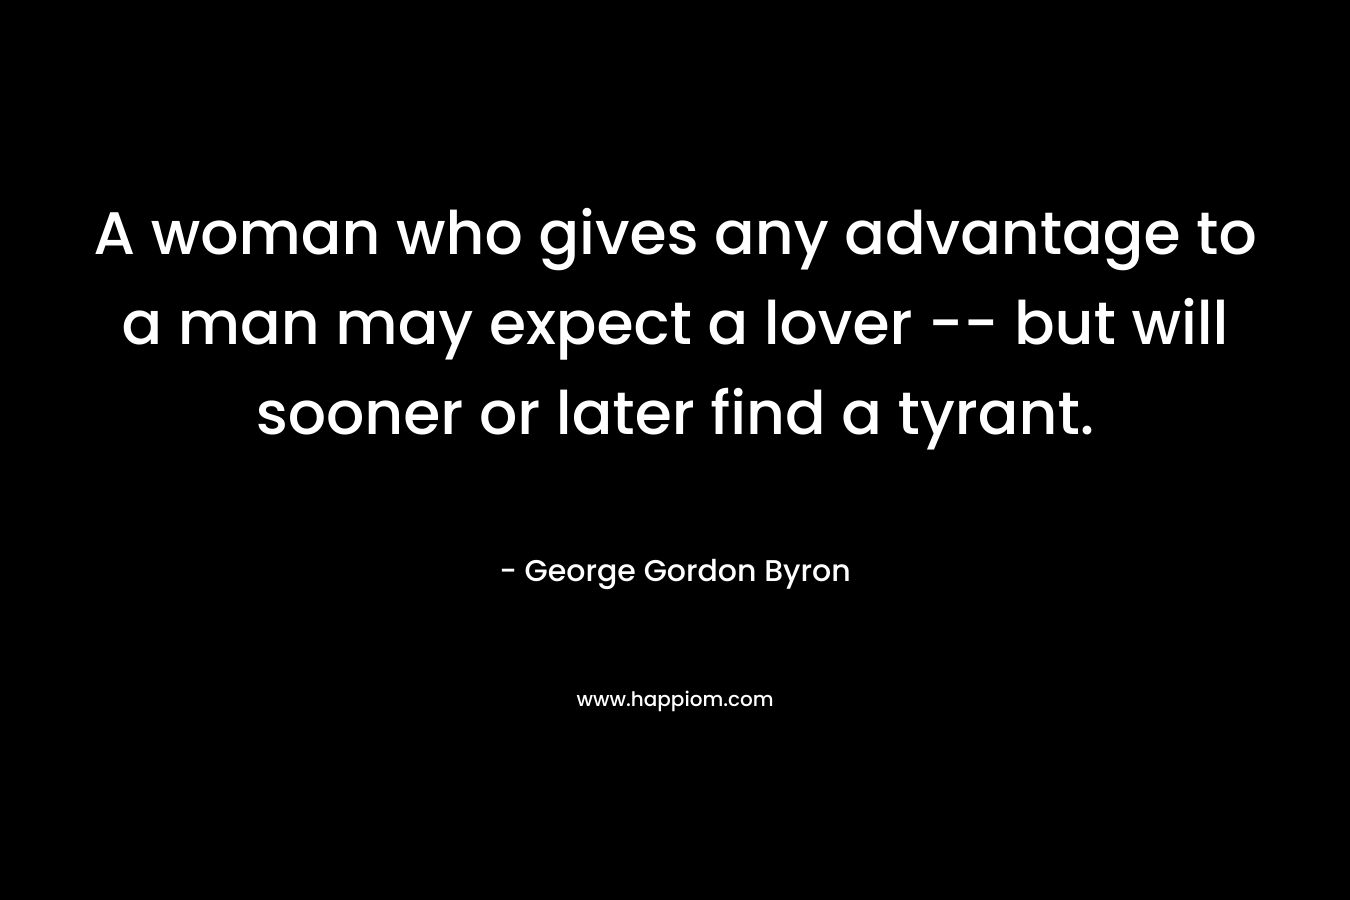 A woman who gives any advantage to a man may expect a lover — but will sooner or later find a tyrant. – George Gordon Byron